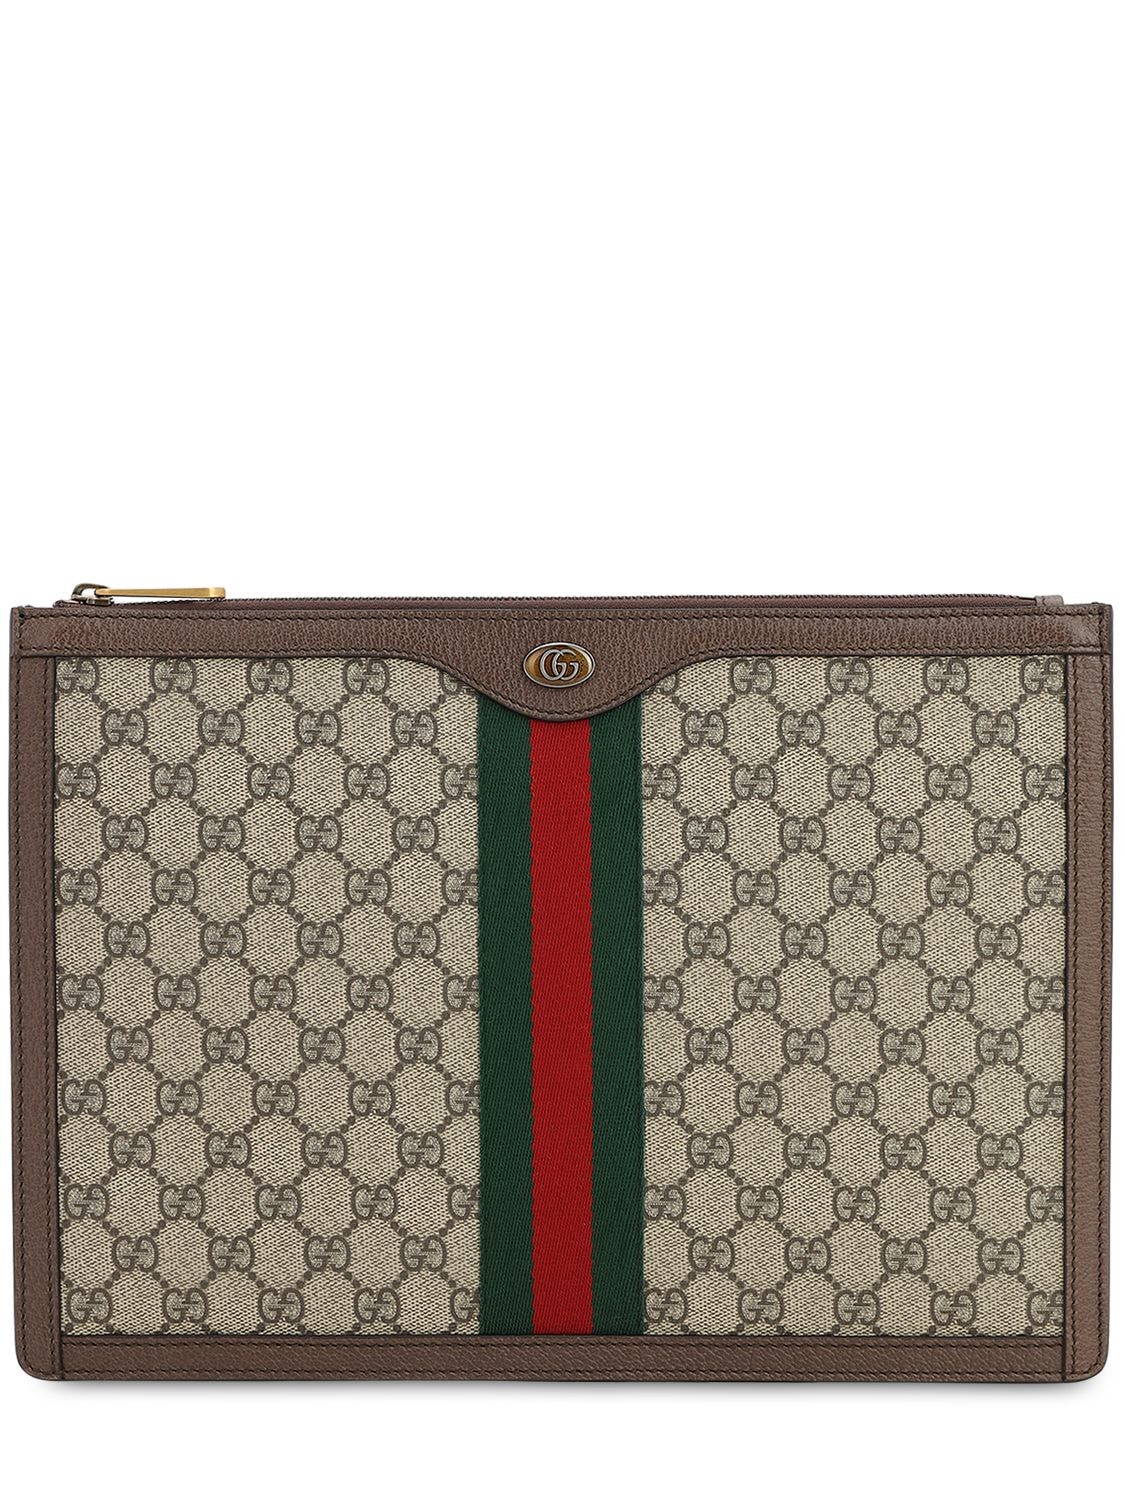 Gucci Coated Gg Supreme Ophidia Pouch W/web In Beige